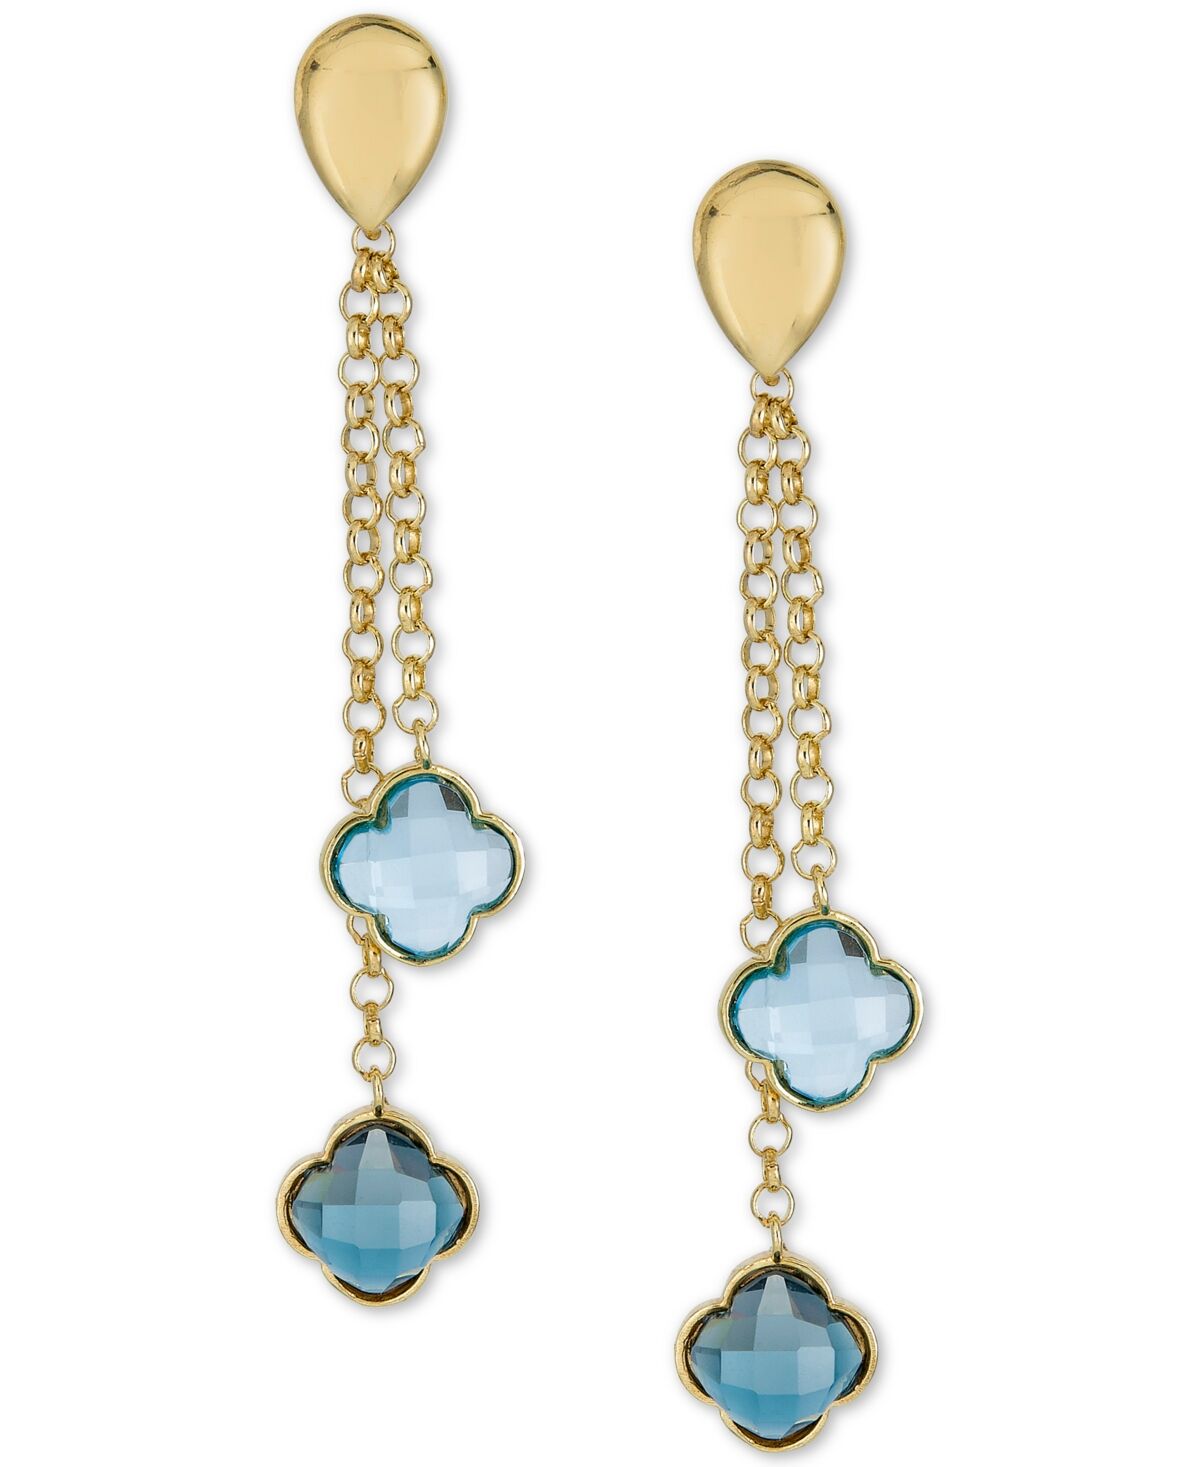 Macy's Amethyst Clover Drop Earrings (5-1/10 ct. t.w.) in Gold Over Sterling Silver (Also Available in Blue Topaz (4 ct. t.w), Made in Italy) - Blue